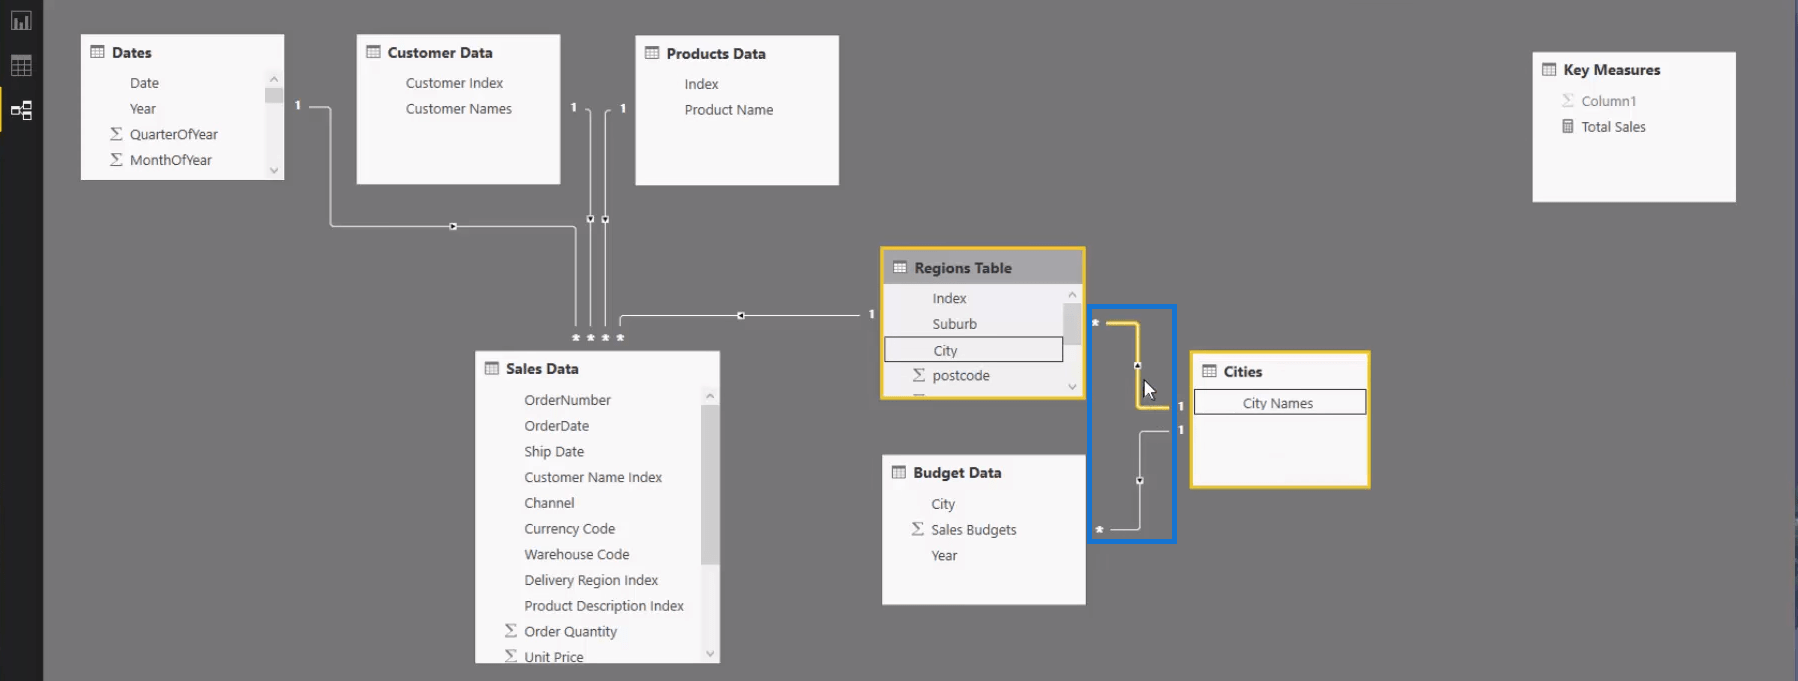 Building The Relationship Using Measures in Power BI